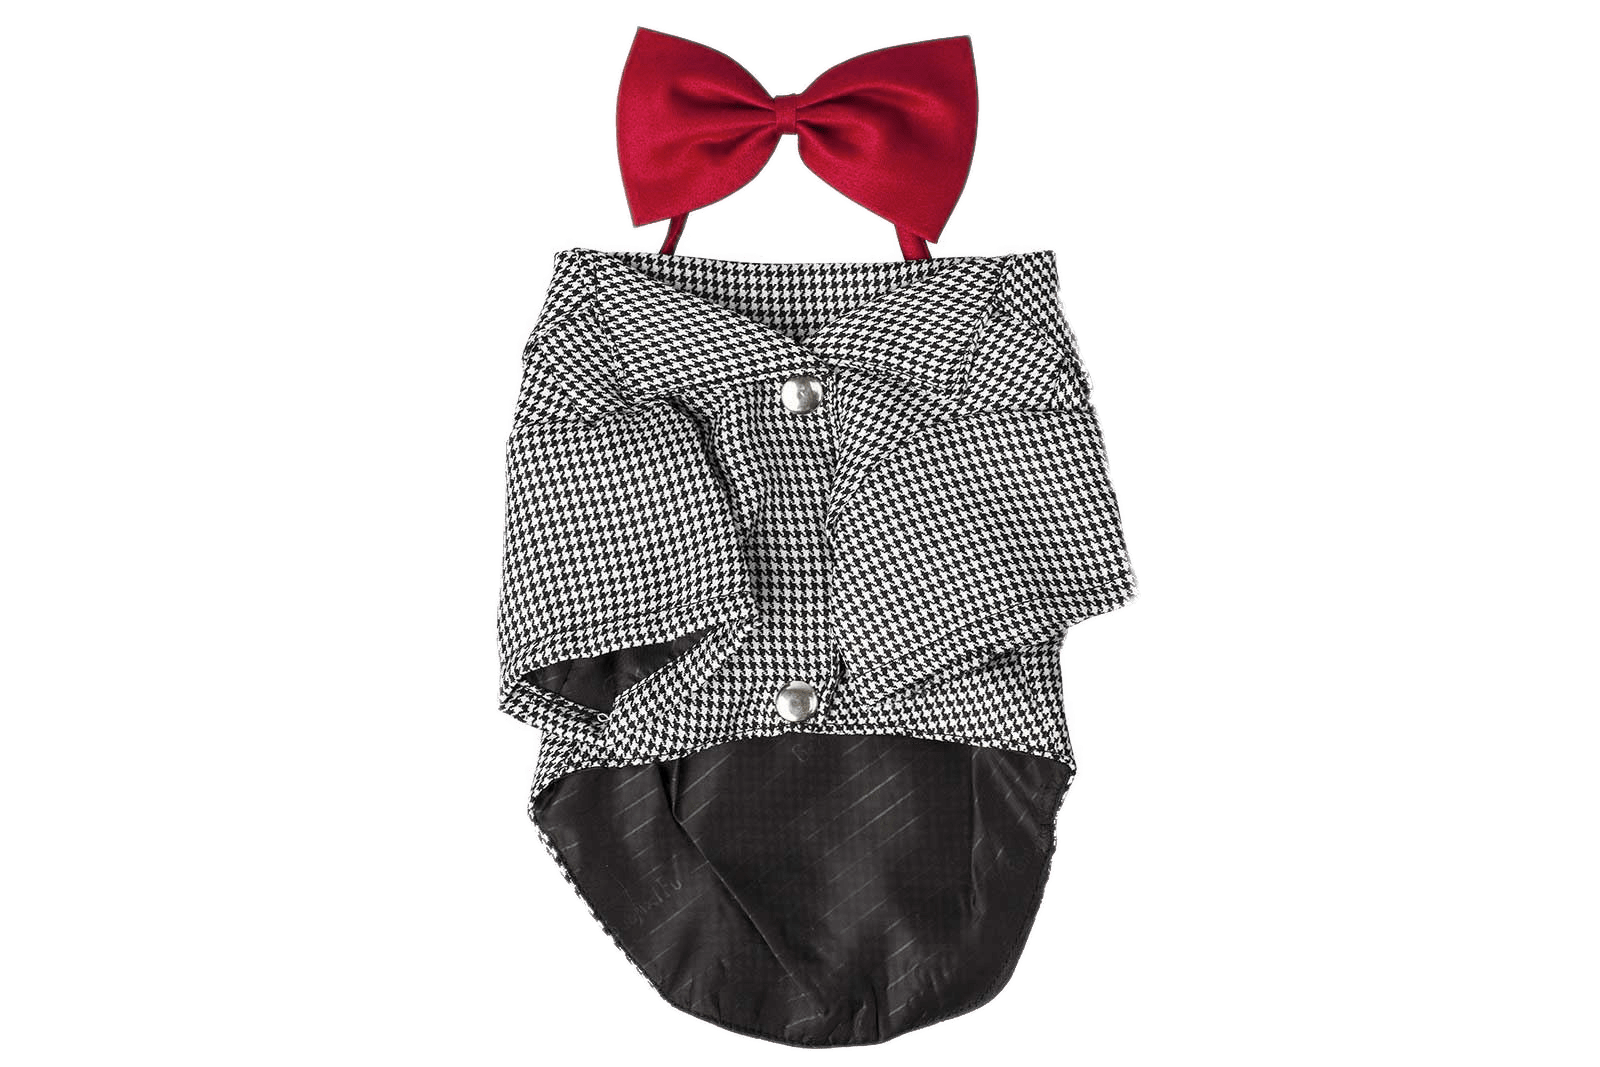 Dog Costume With Bow Tie SVG Clip arts